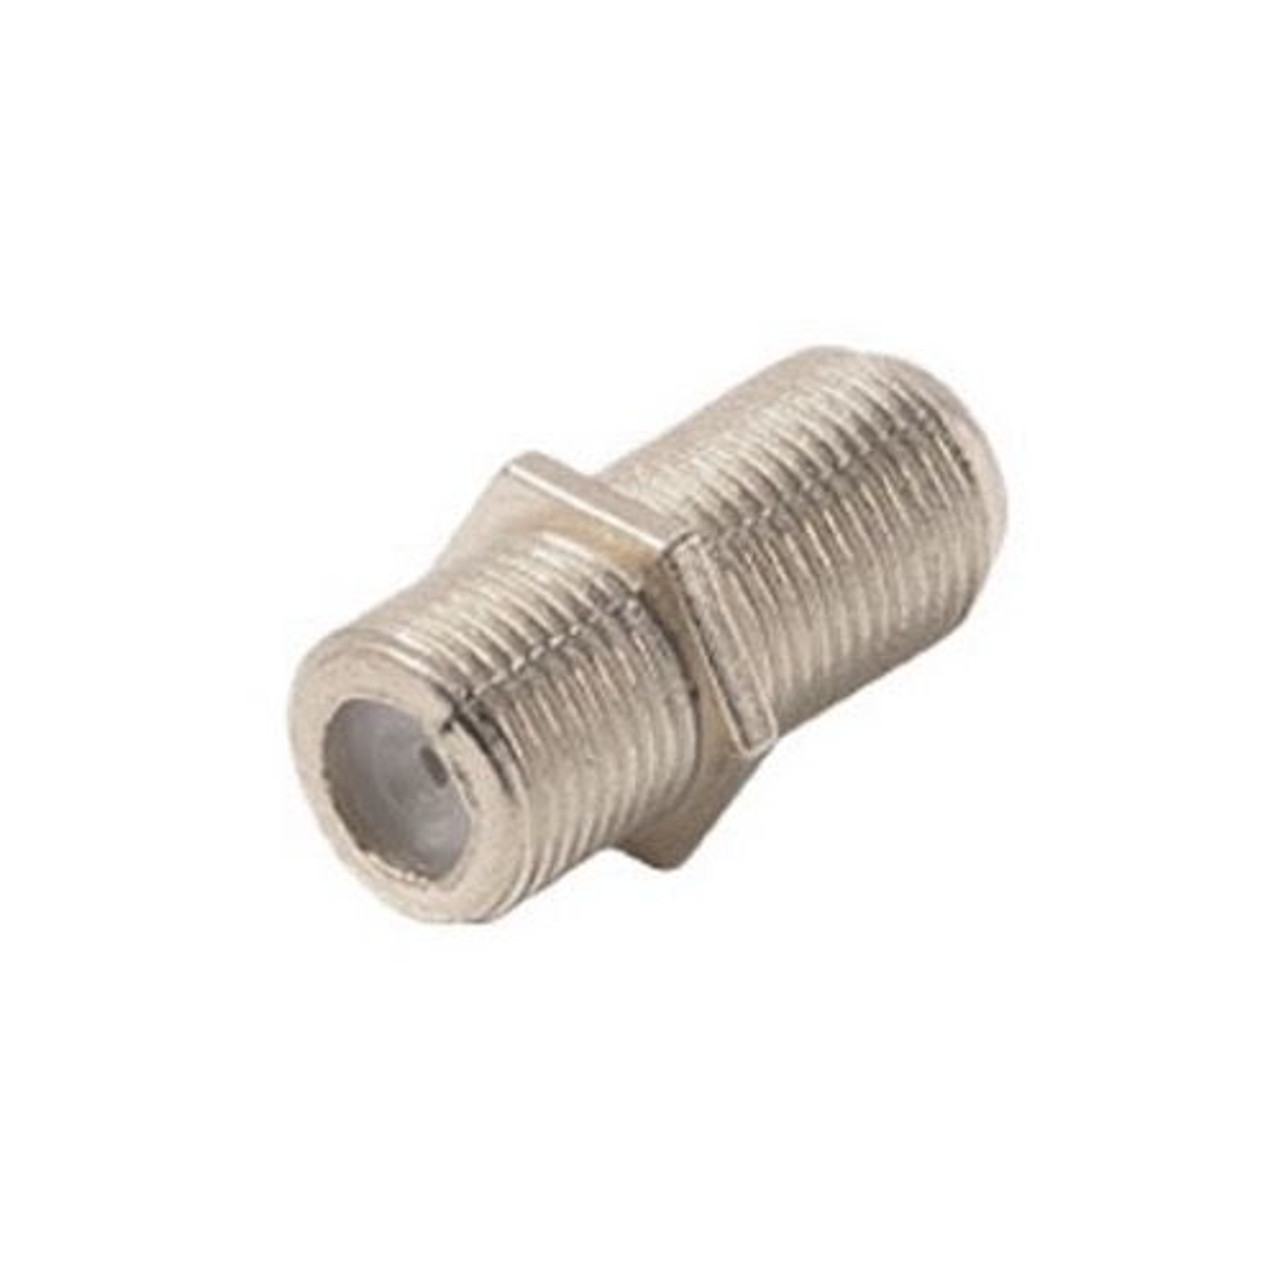 Steren 200-050-100 F-81 Dual Female Coupler Splice Barrel Connector Adapter 100 Pack RG6 RG59 Coaxial Cable 5-900 MHz Female to Female RG-6 RG-59 Coaxial Audio Video 75 Ohm Coaxial Cable Splice Plug Extension, Part # 200050-100